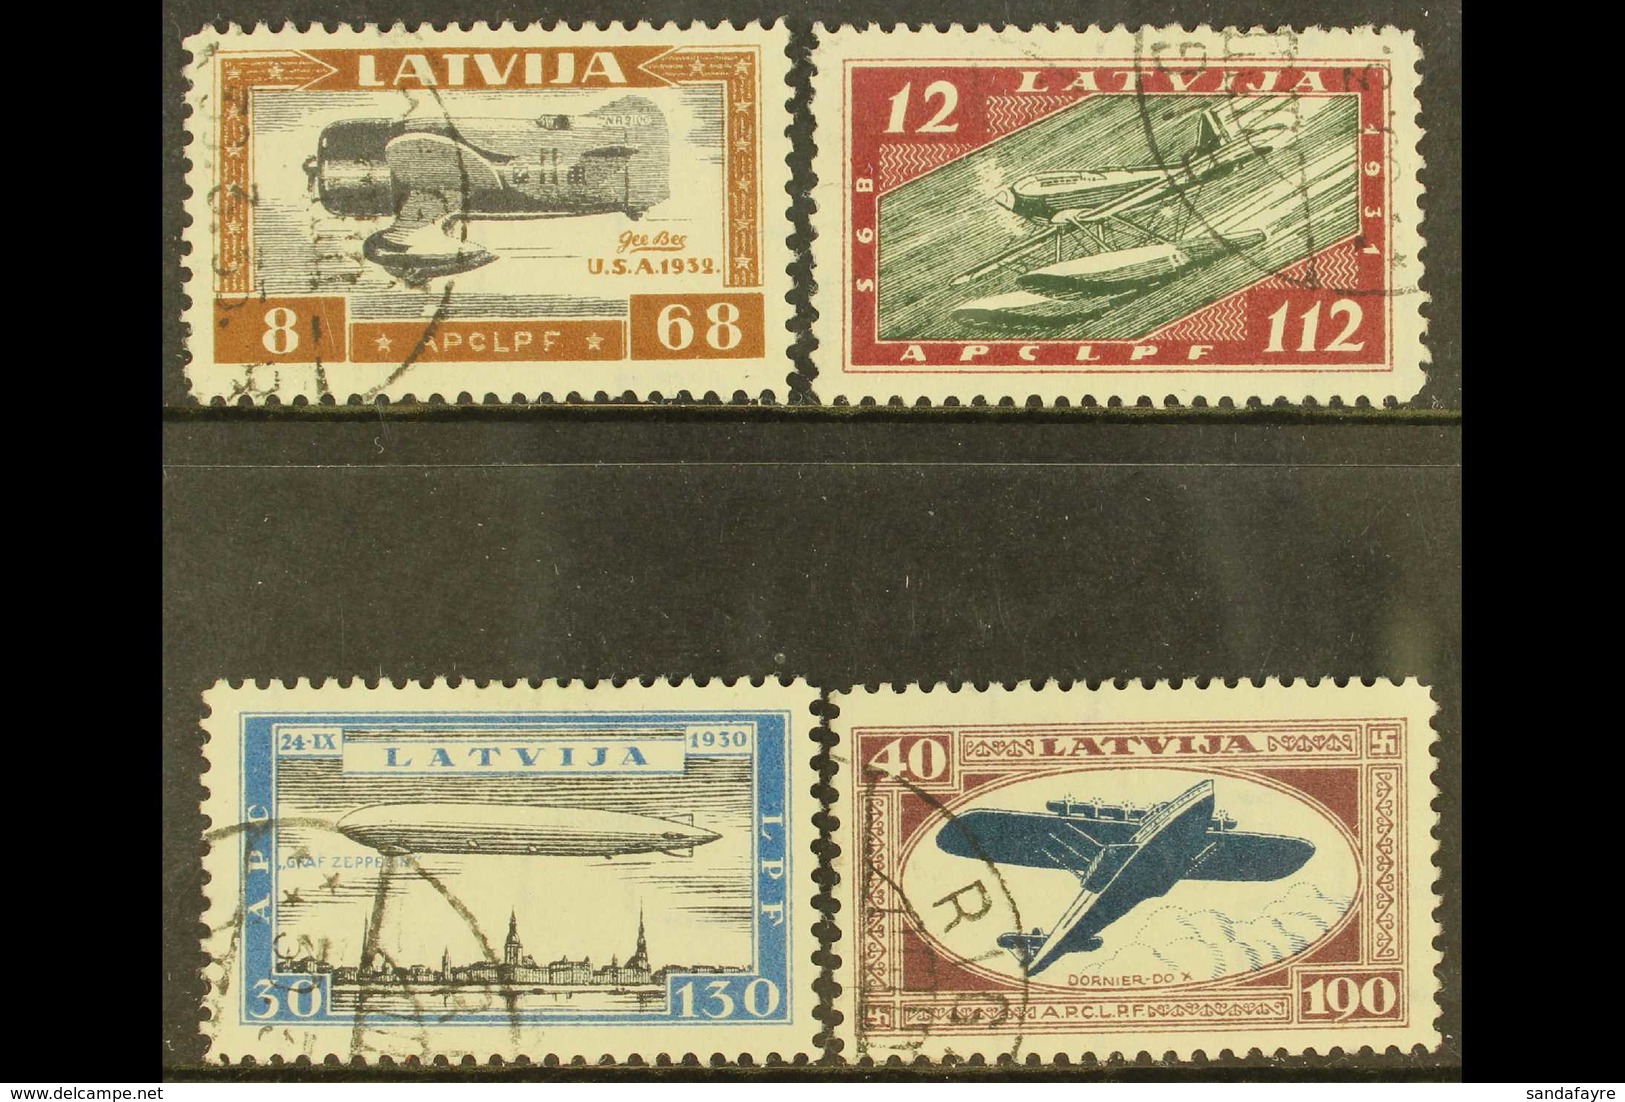 1933 (Sep) Air Charity Wounded Airmen Complete Perf Set (Michel 228/31 A, SG 243A/46A), Very Fine Cds Used, Very Fresh.  - Latvia